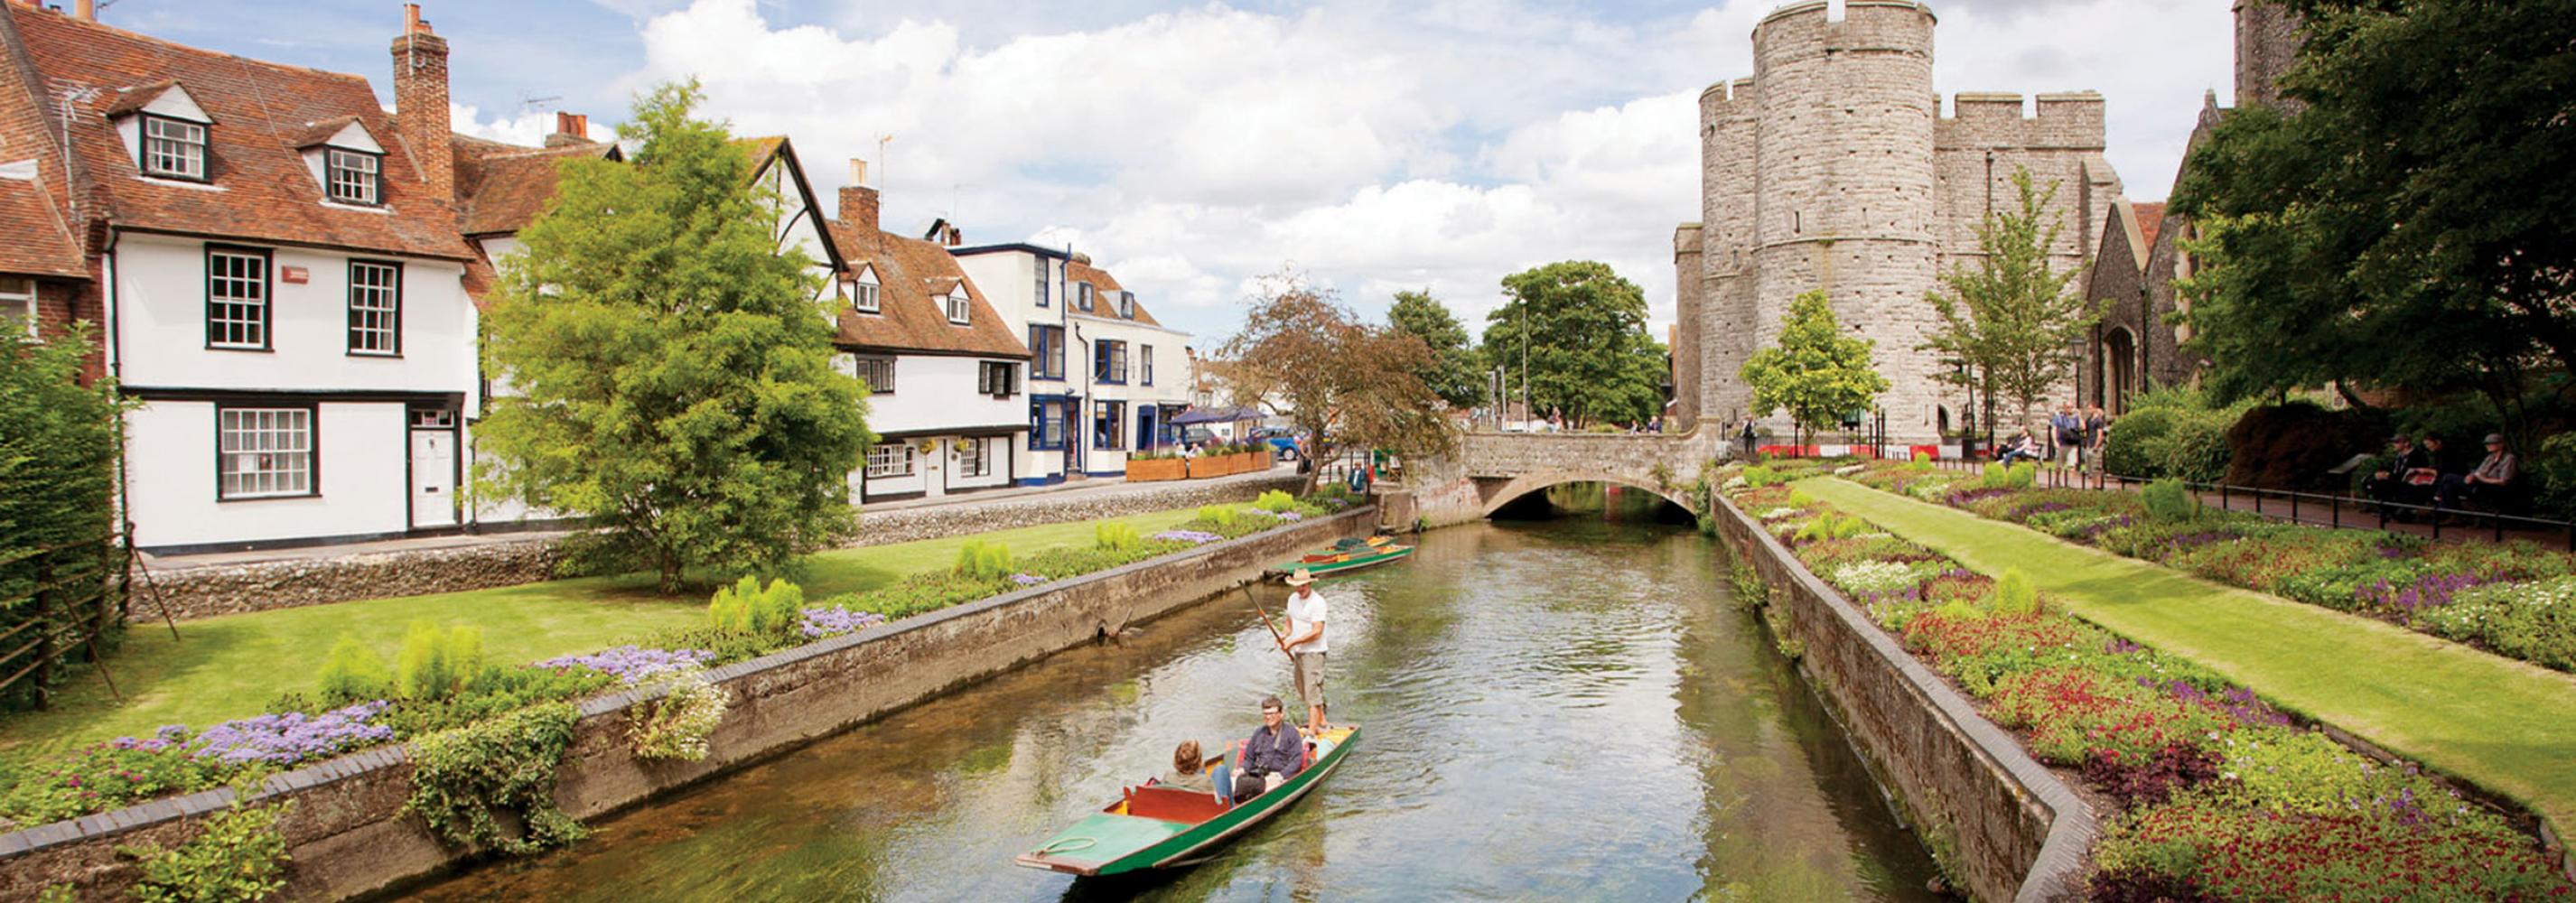 Canterbury city is only a 15 minute walk away